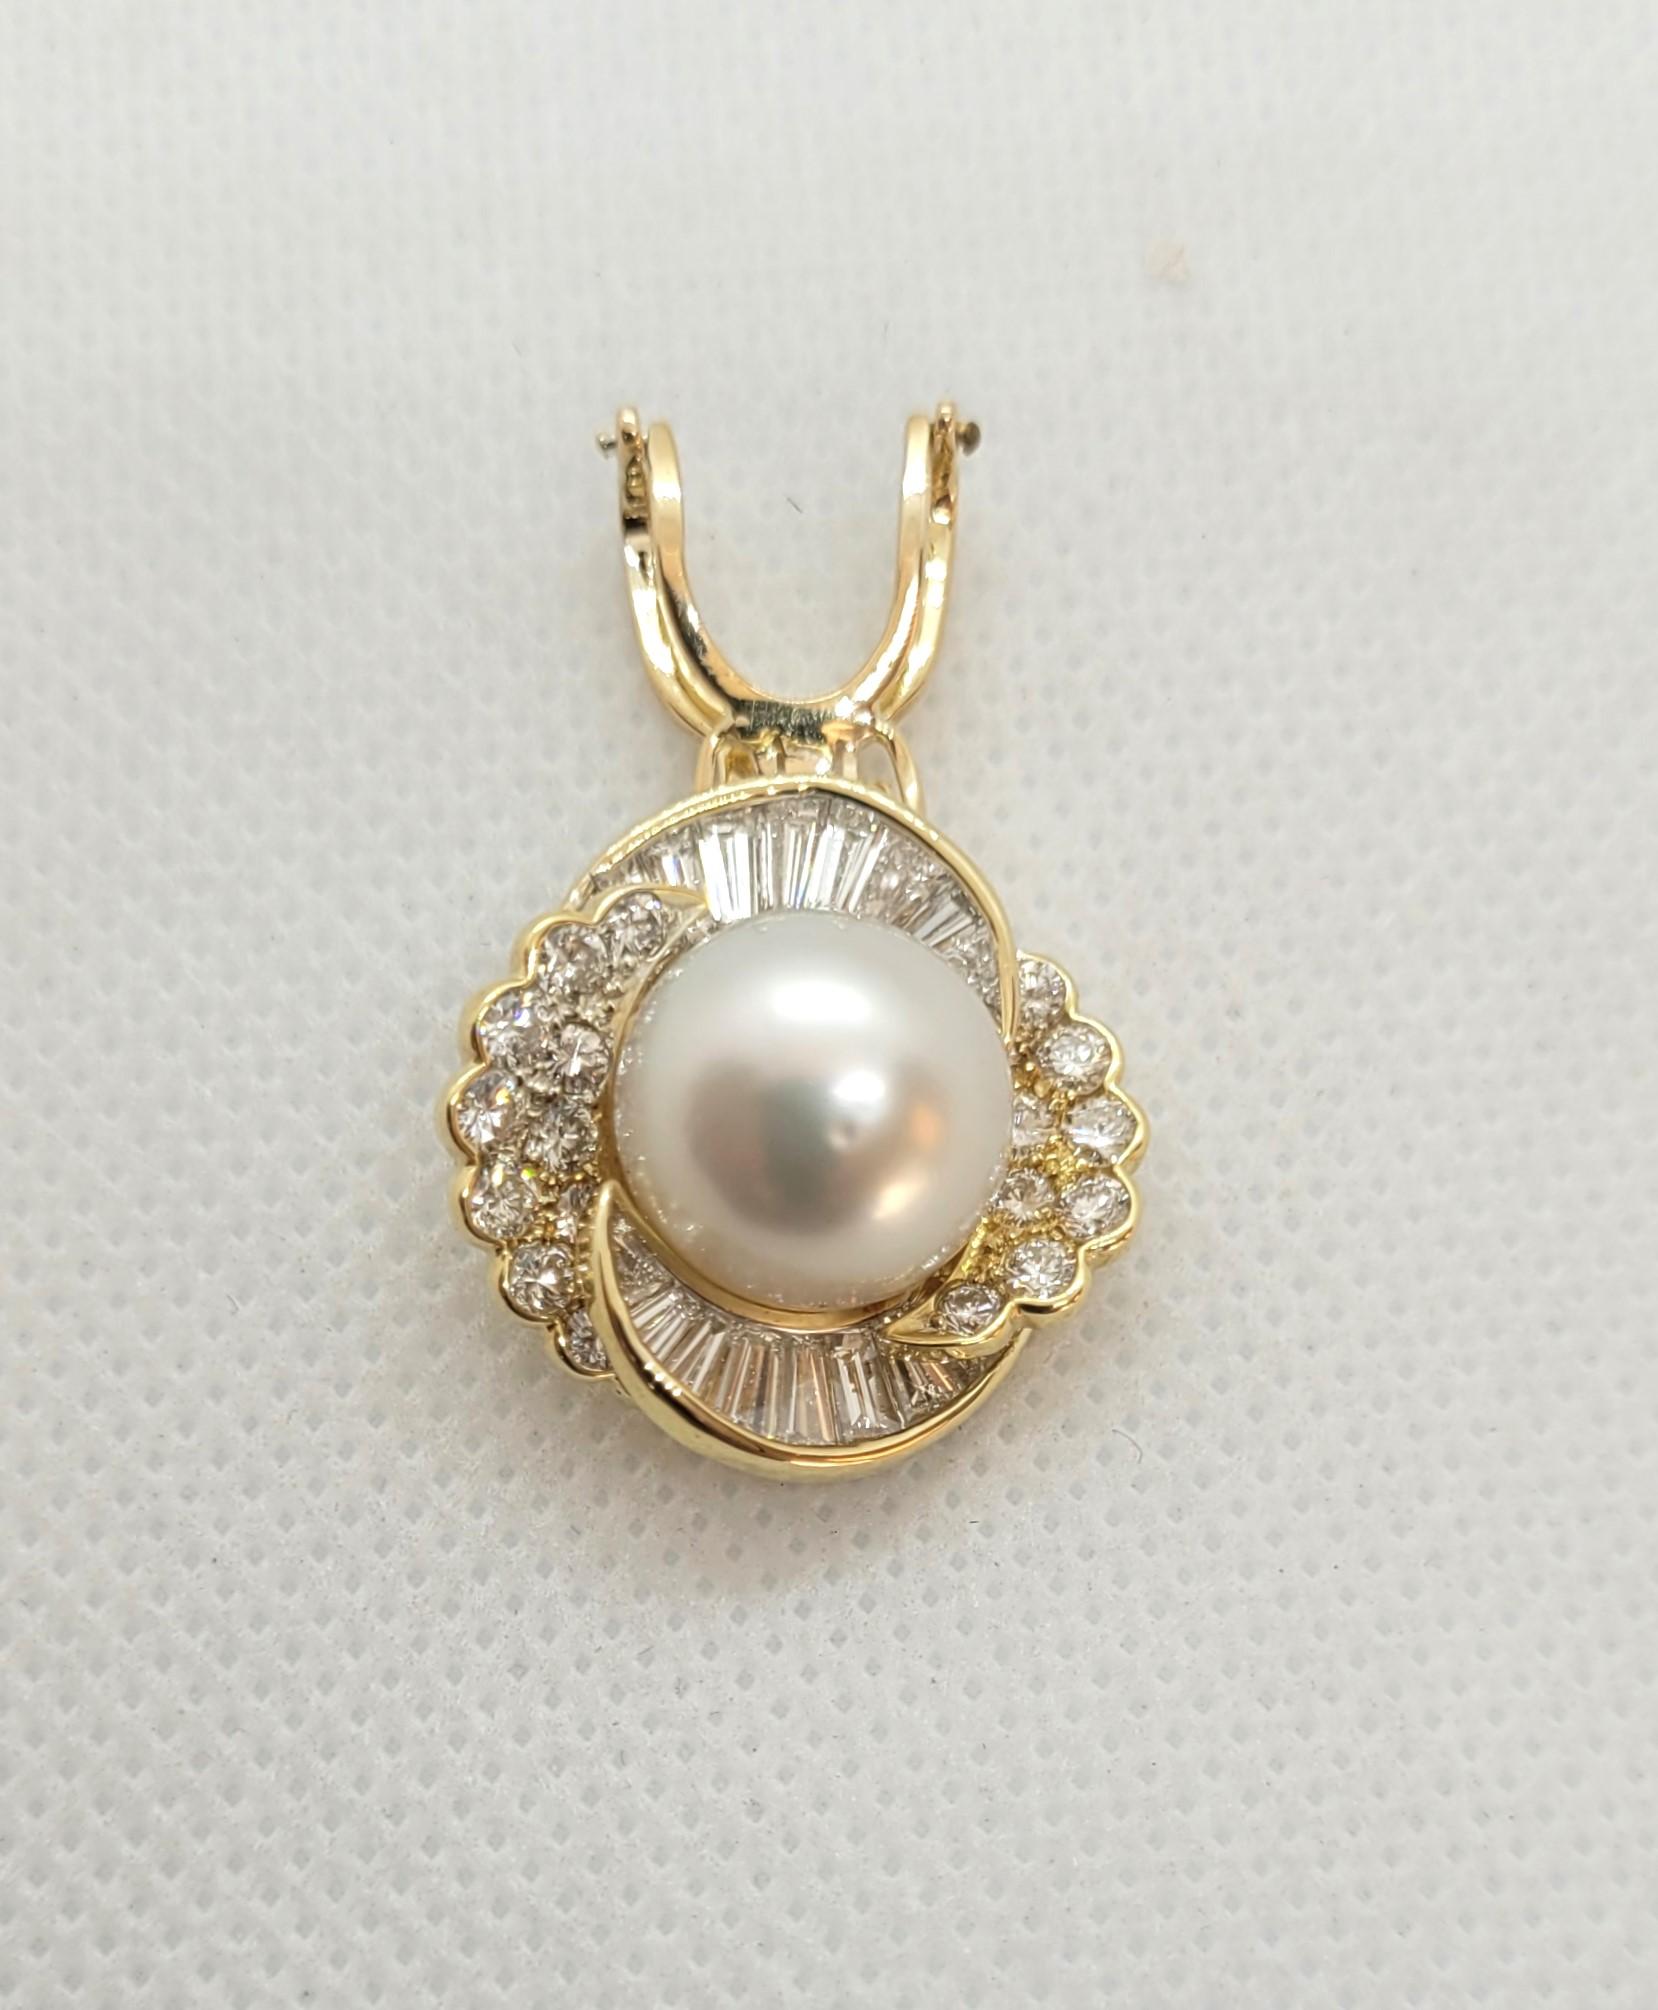 14kt Yellow Gold Pearl Diamond Pendant Enhancer, 12.3mm White Pearl, 1.78cttw In Good Condition For Sale In Rancho Santa Fe, CA